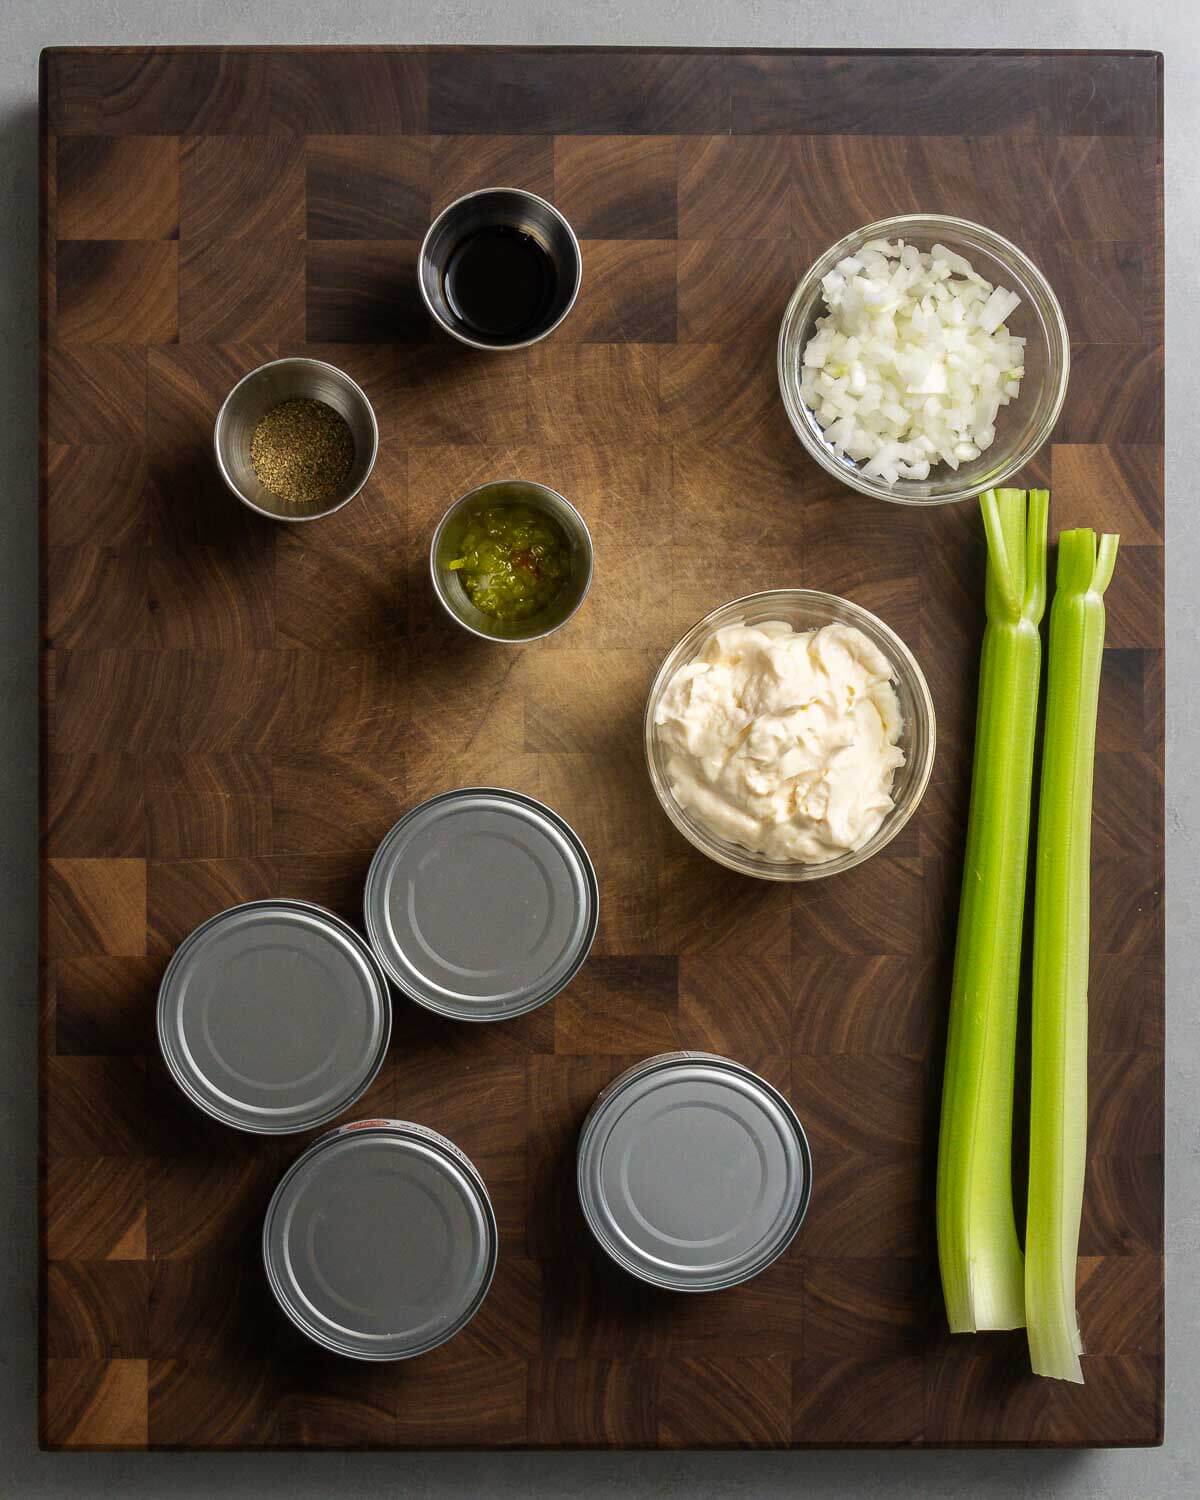 Ingredients shown: celery salt, soy sauce, relish, mayonnaise, onion, celery, and canned tuna.